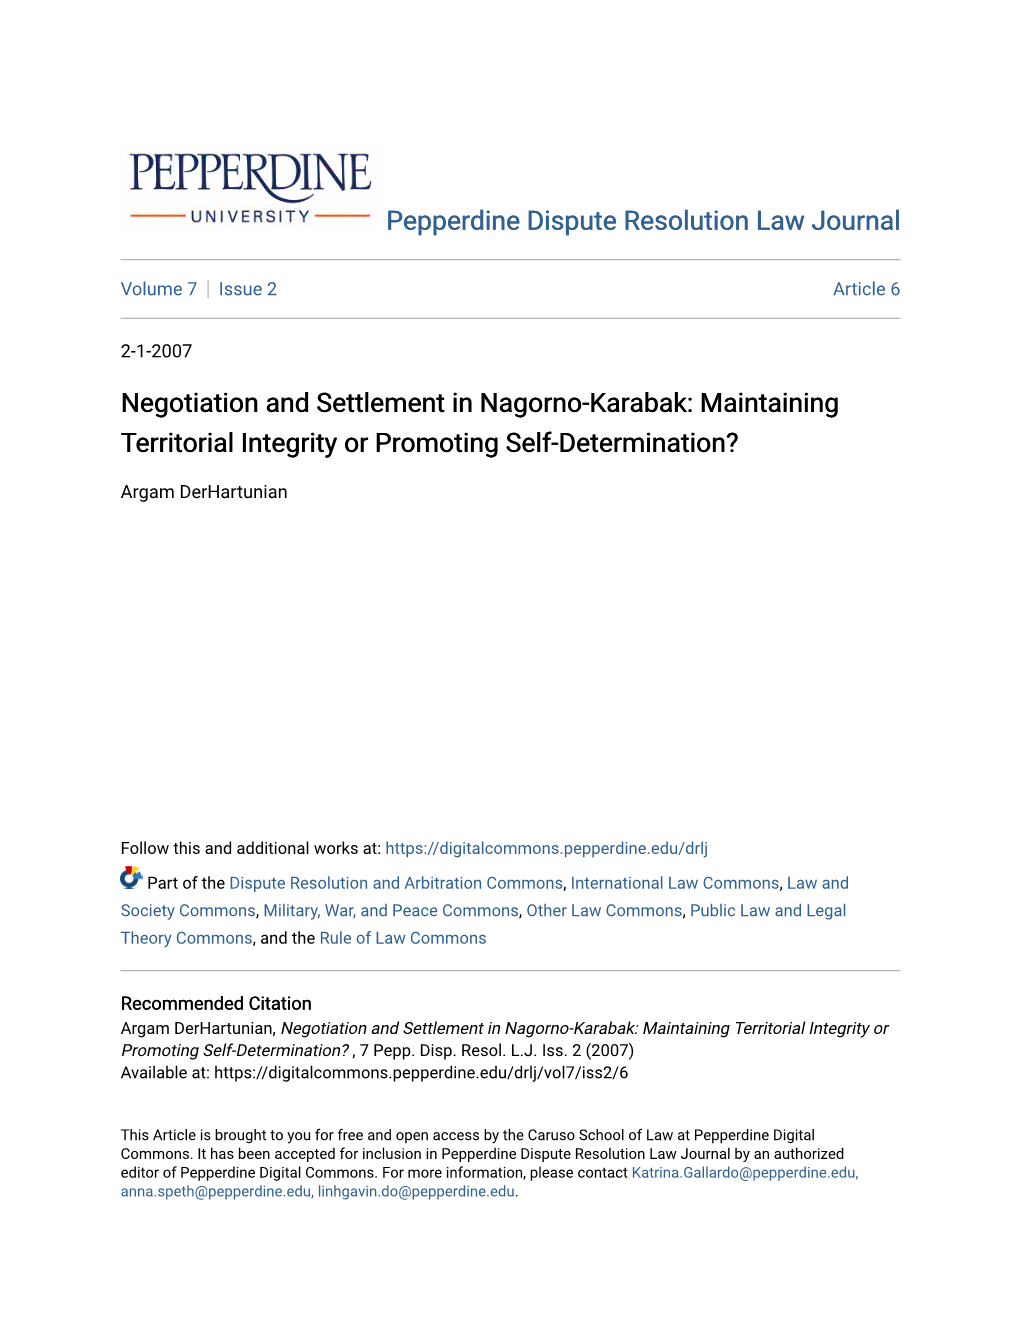 Negotiation and Settlement in Nagorno-Karabak: Maintaining Territorial Integrity Or Promoting Self-Determination?